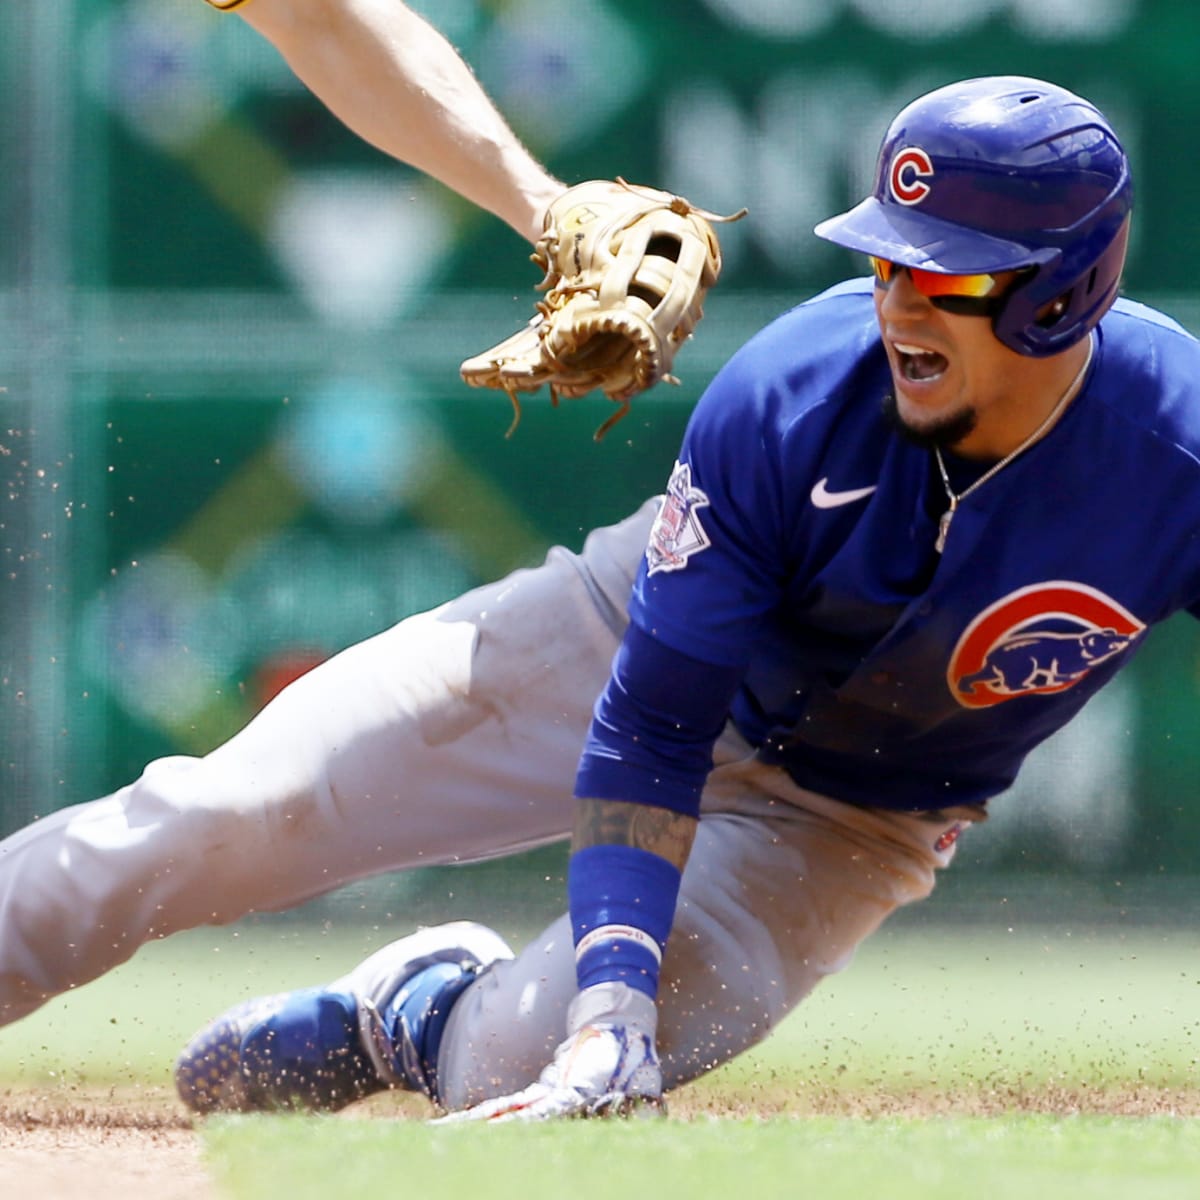 Javier Baez's home run lifts Cubs to 1-0 win over Giants in Game 1 of NLDS, MLB